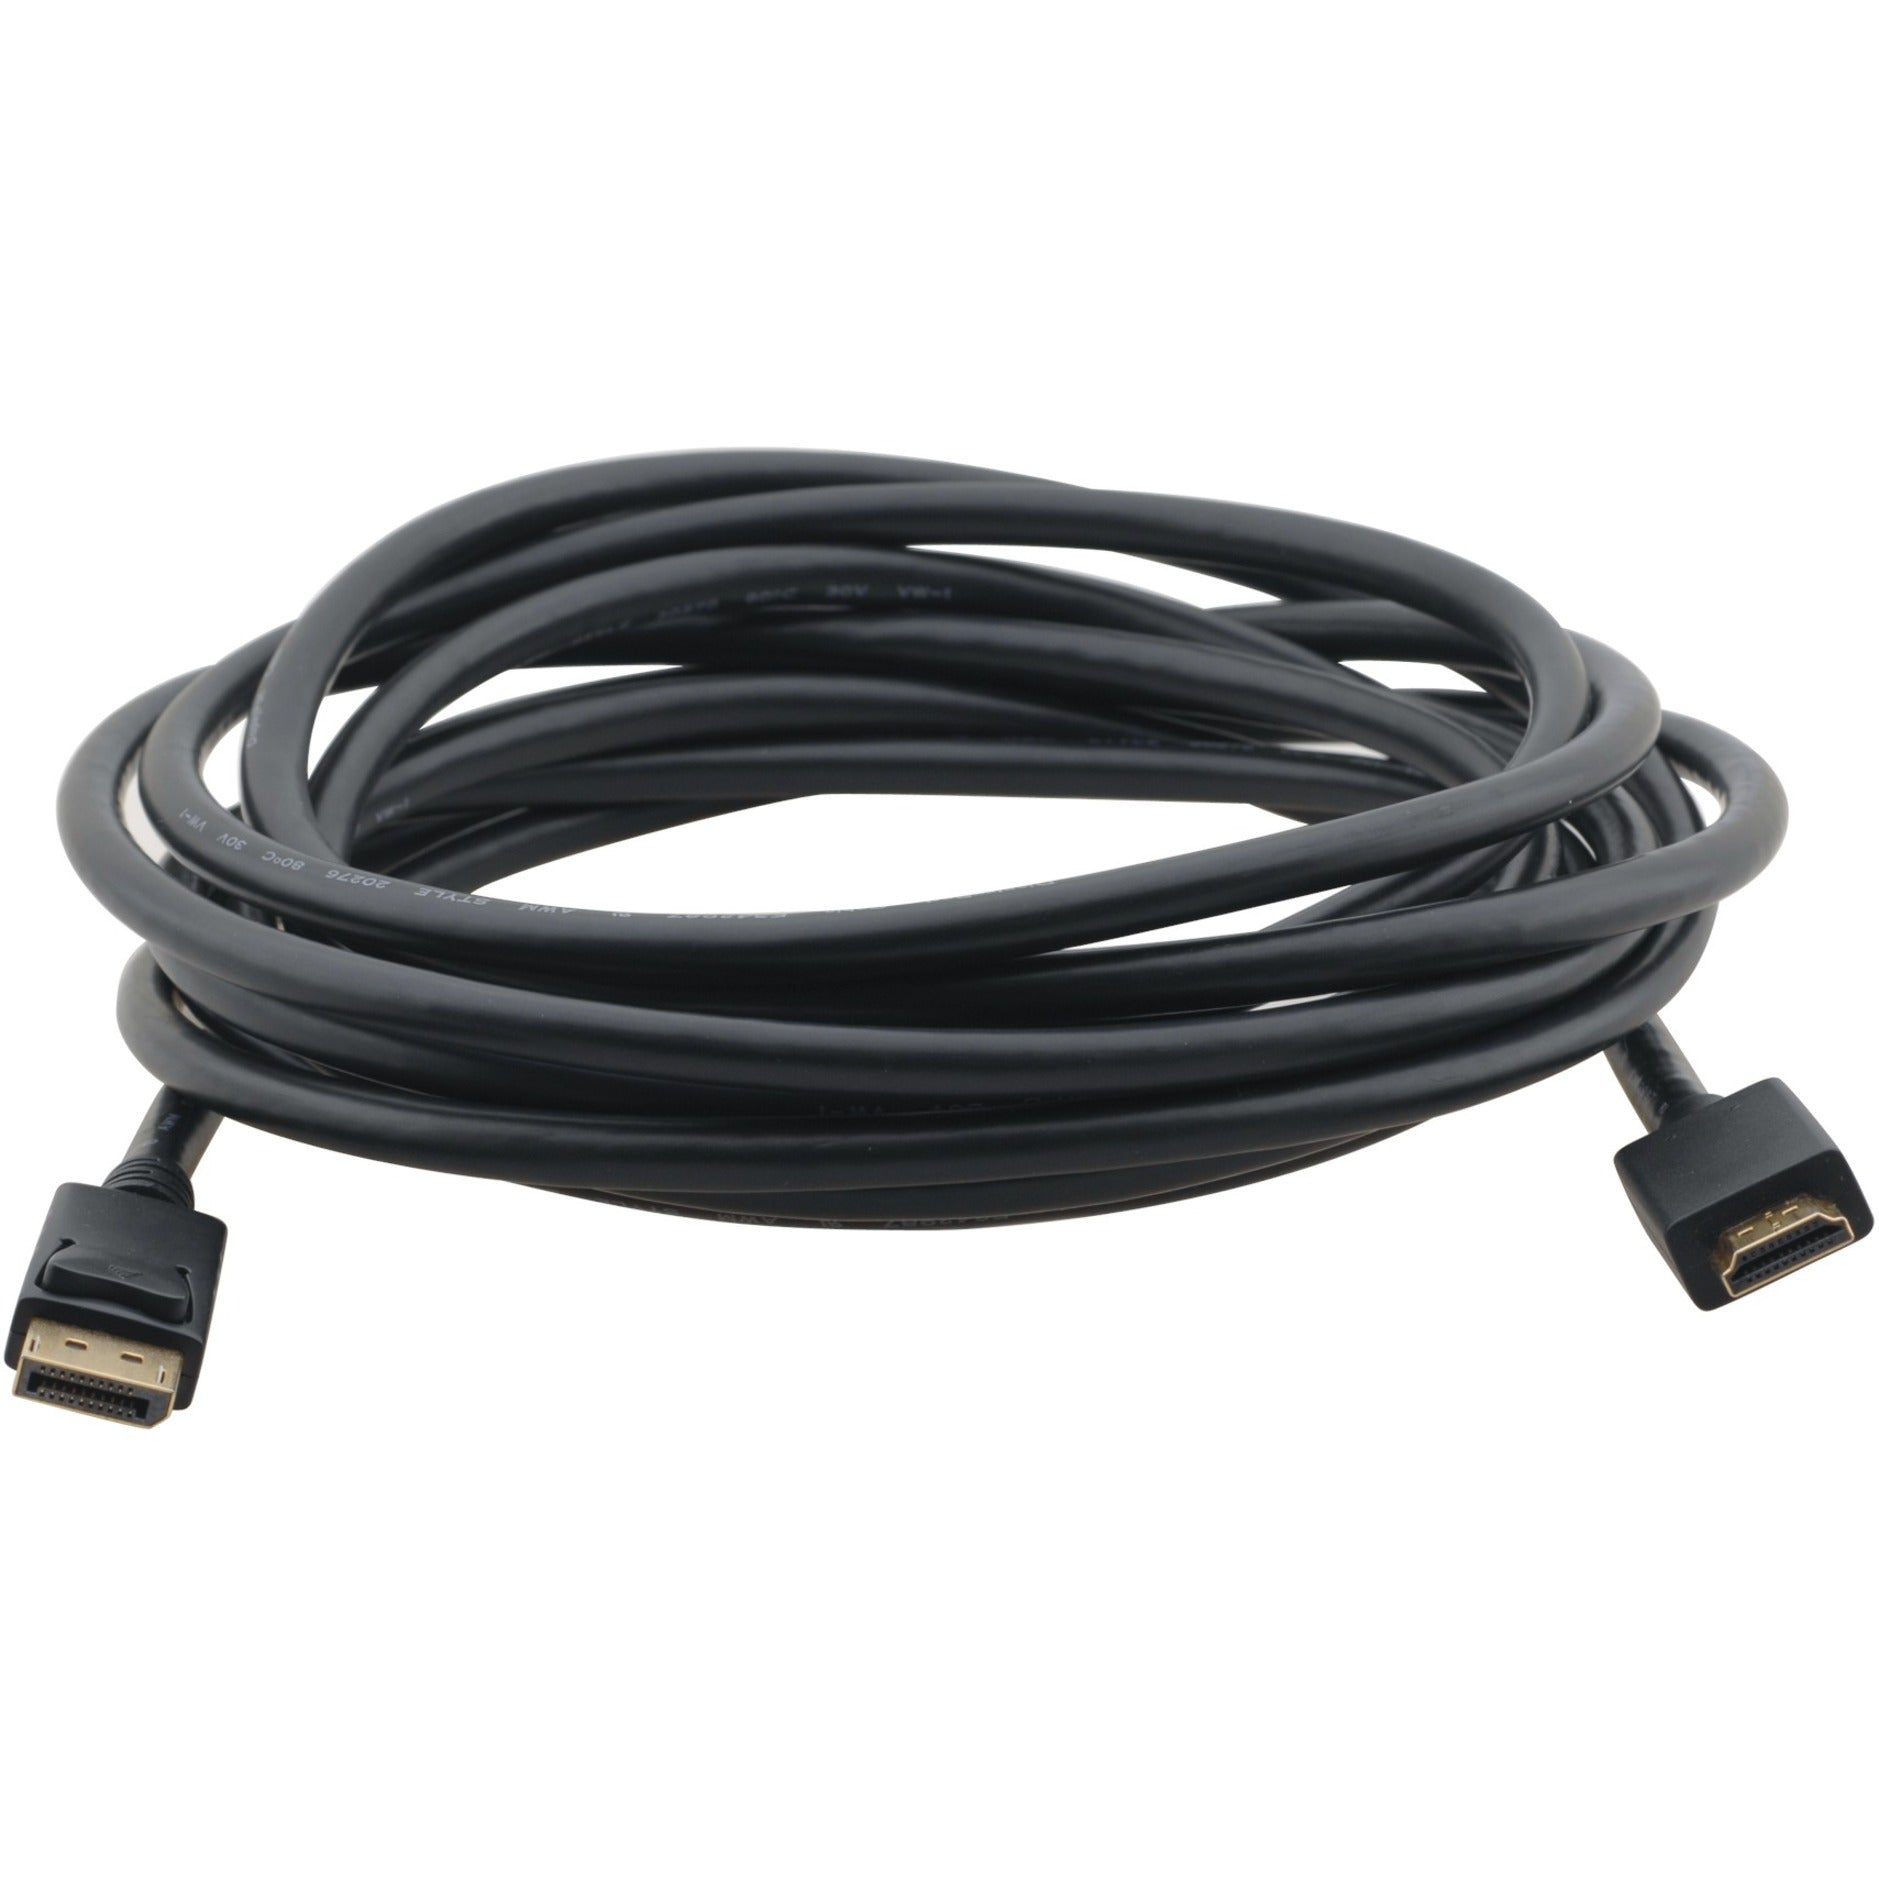 Kramer 97-0601003 DisplayPort (M) to HDMI (M) Cable, 3 ft, Copper Conductor